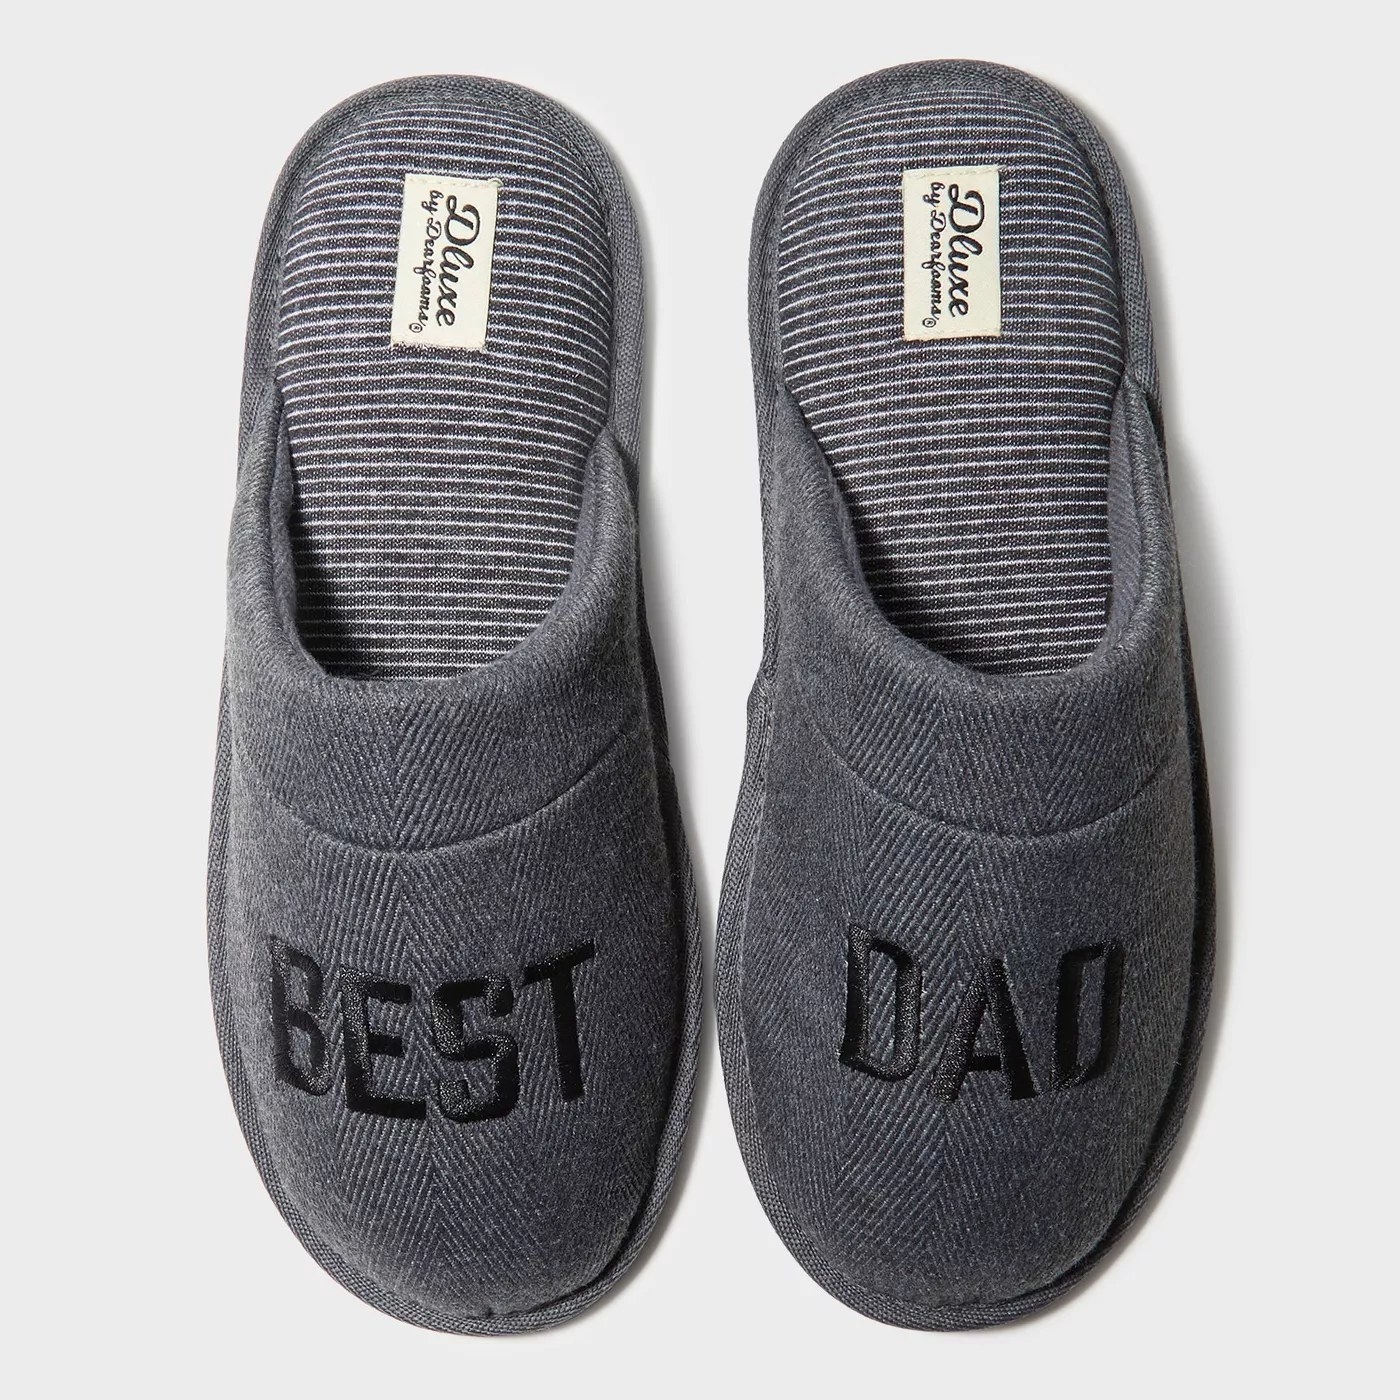 The gray slippers with &quot;Best&quot; written on black in one and &quot;Dad&quot; written in black on the other